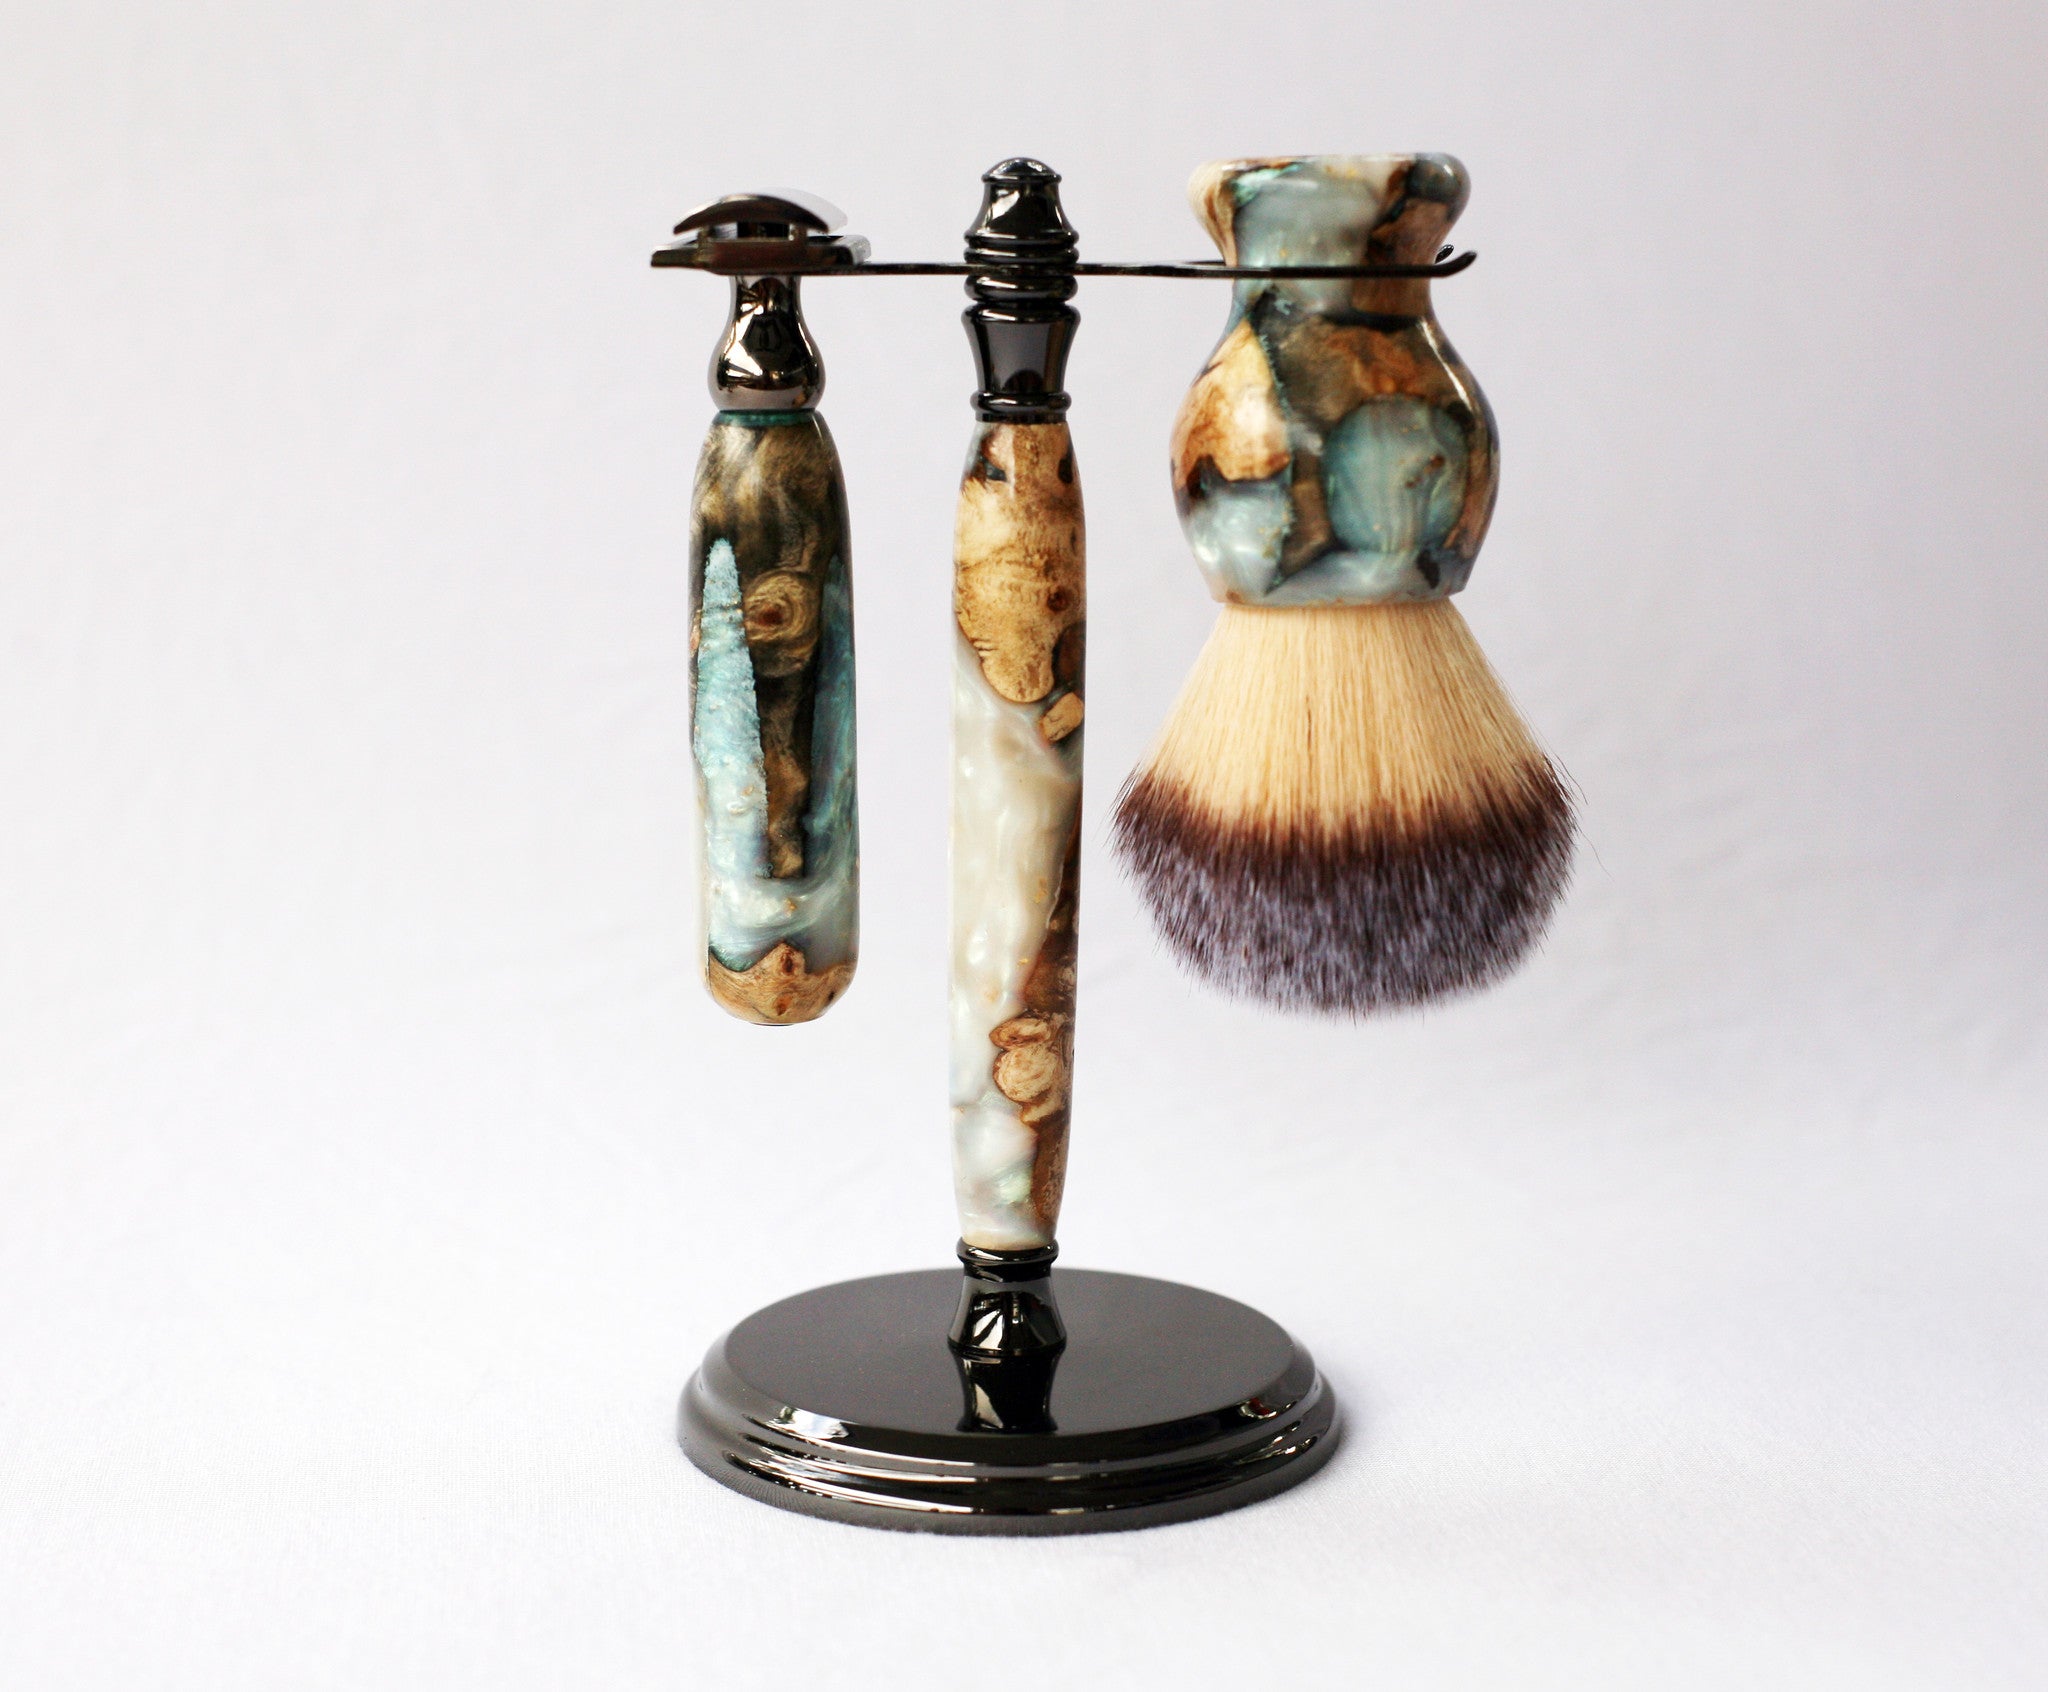 Buckeye Burl Shave Set with 'Travel to Jupiter'( pearl)Resin safety razor, 26mm lather brush and a matching shave stand. - CreationsByWill